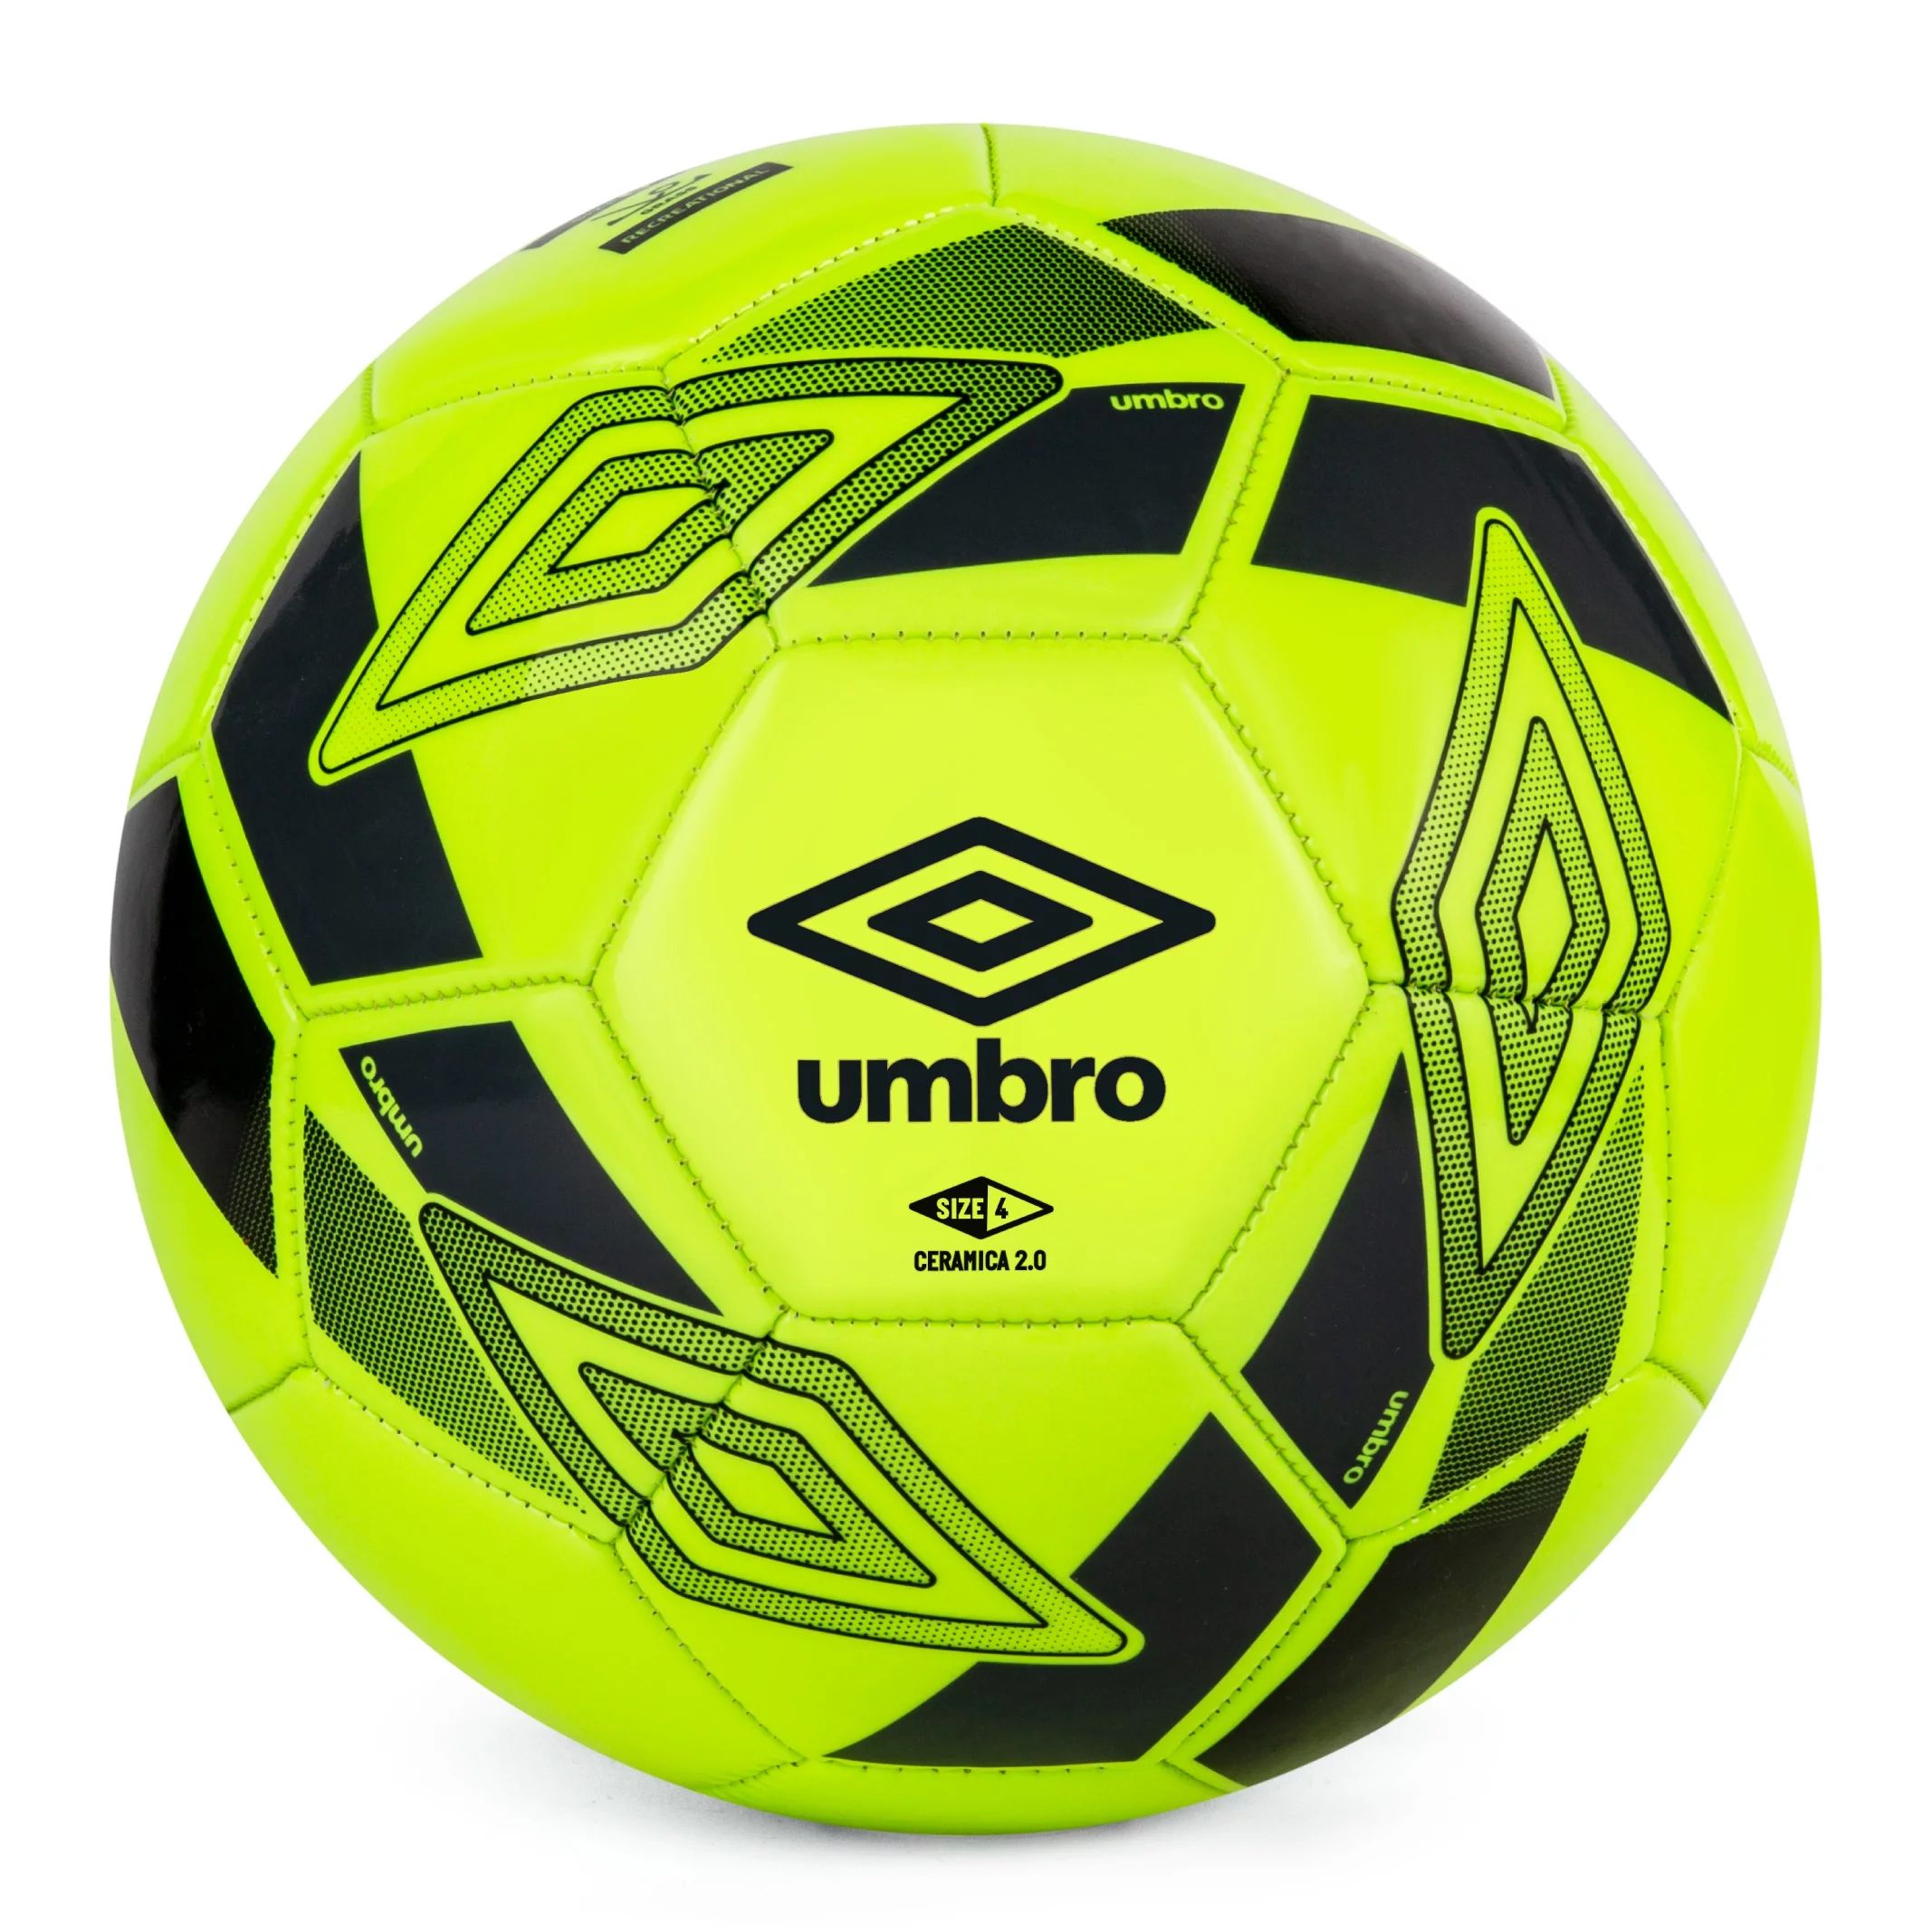 Umbro Ceramica 2.0 Size 4 Youth and Beginner Soccer Ball, Yellow | Walmart (US)